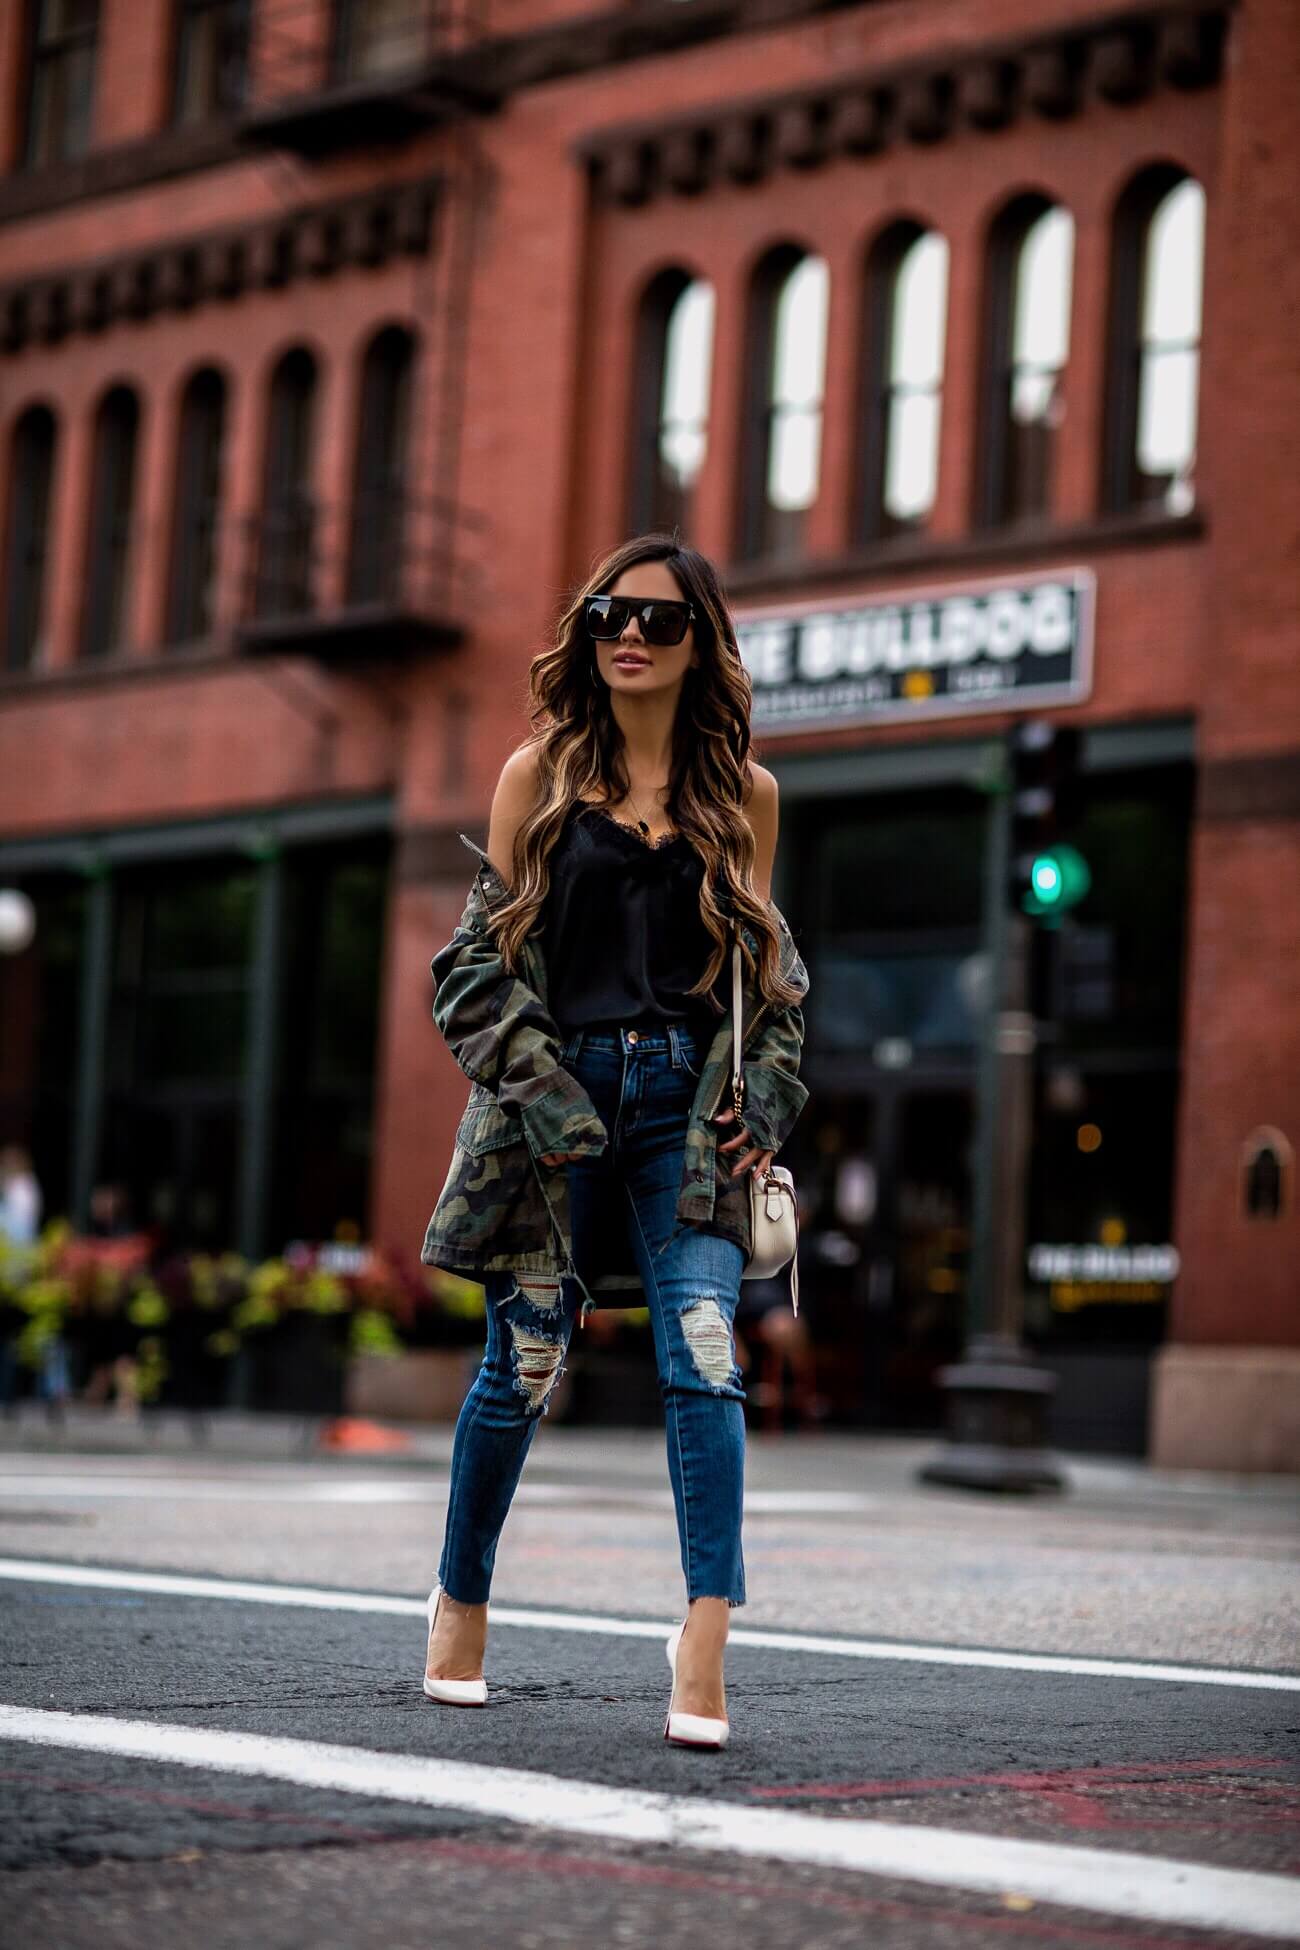 mia mia mine wearing l'agence distressed denim and a camo jacket from shopbop